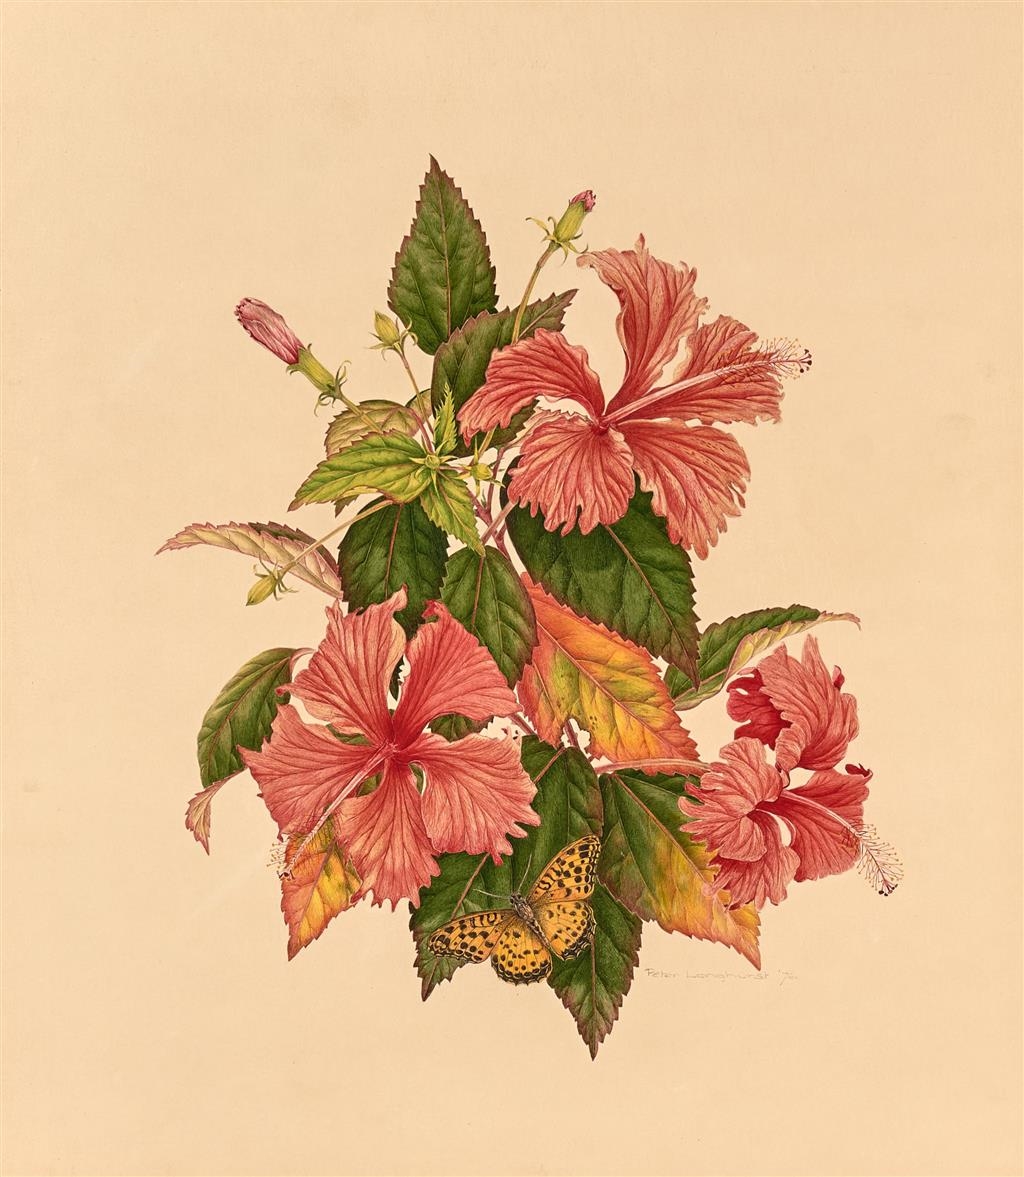 Chinese Hibiscus with Butterfly by Peter Longhurst, 1976